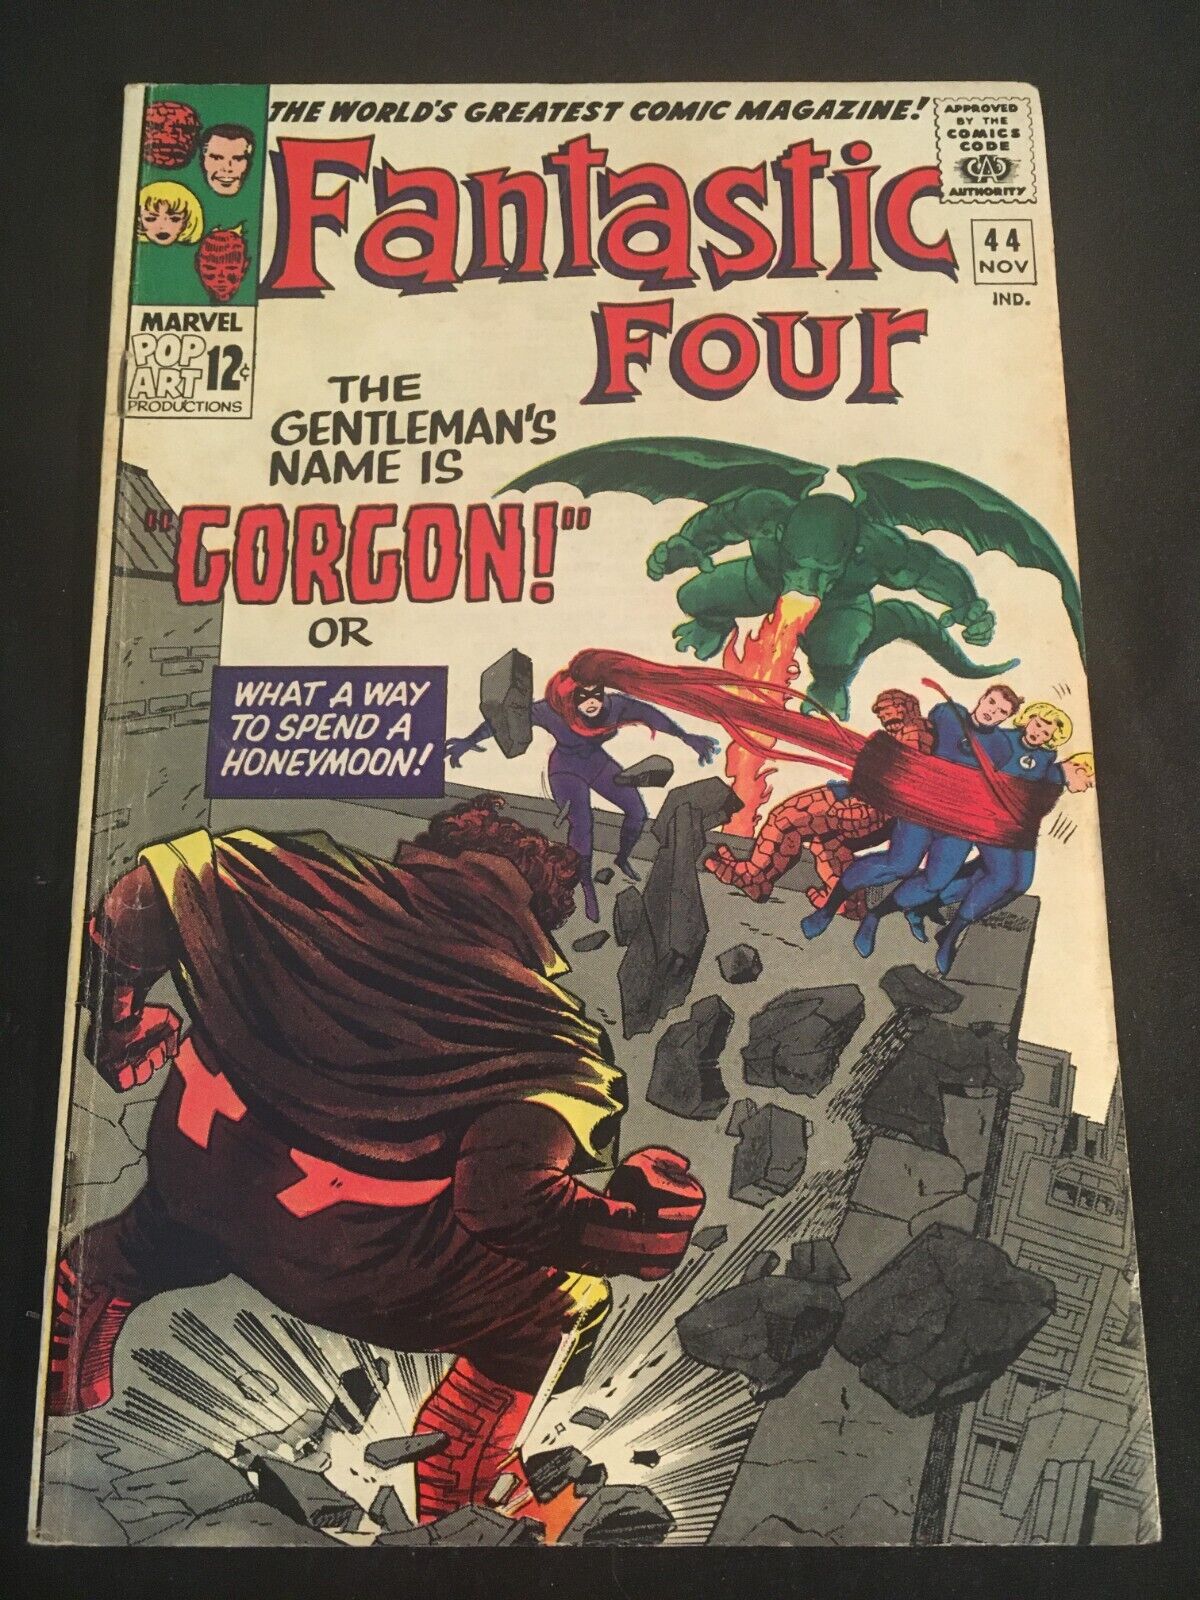 THE FANTASTIC FOUR #44 VG+/F- Condition